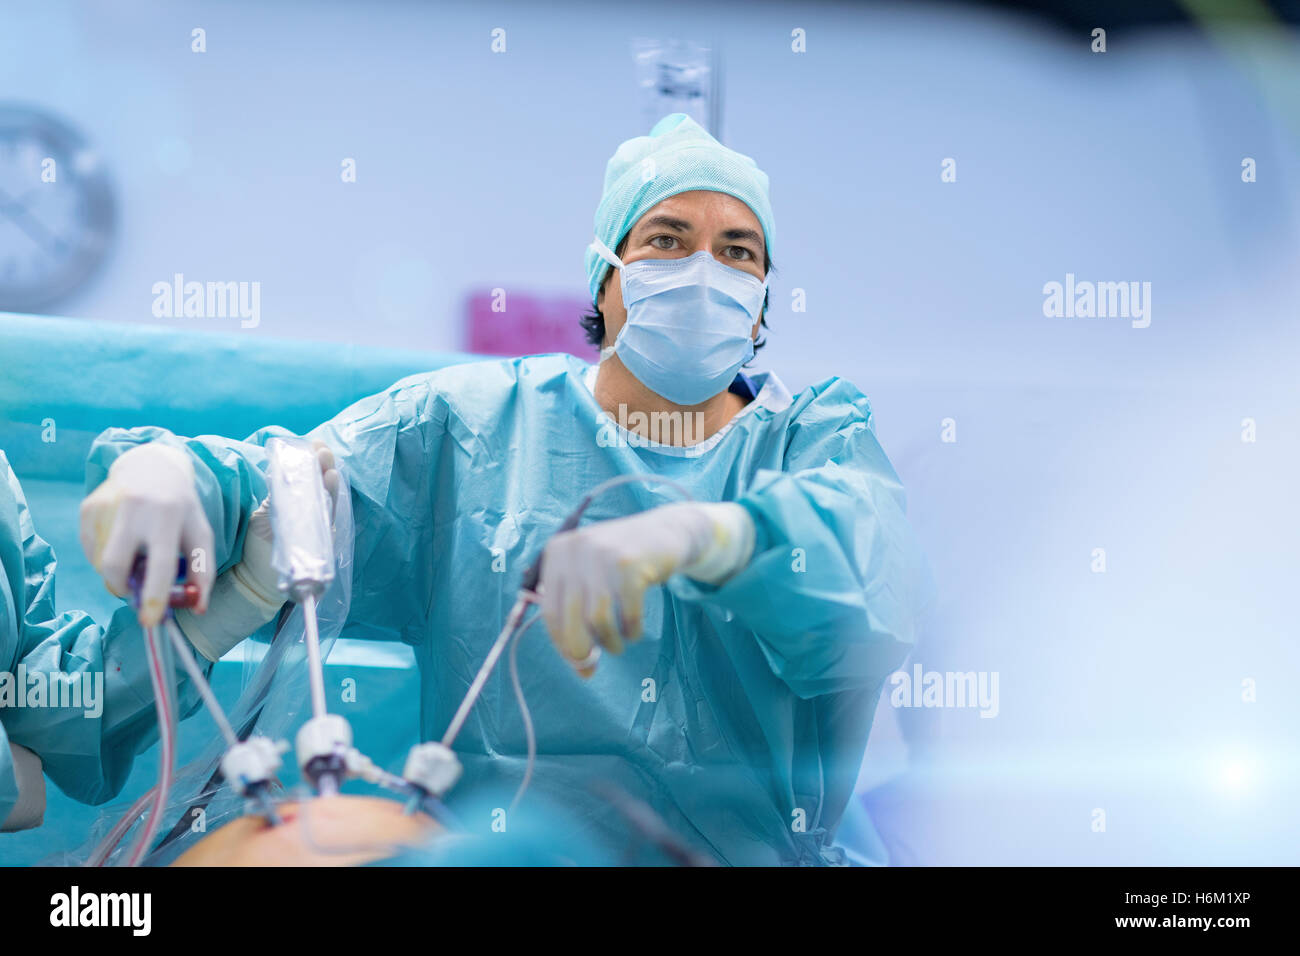 Surgeons performing surgery in operating Theater. Stock Photo